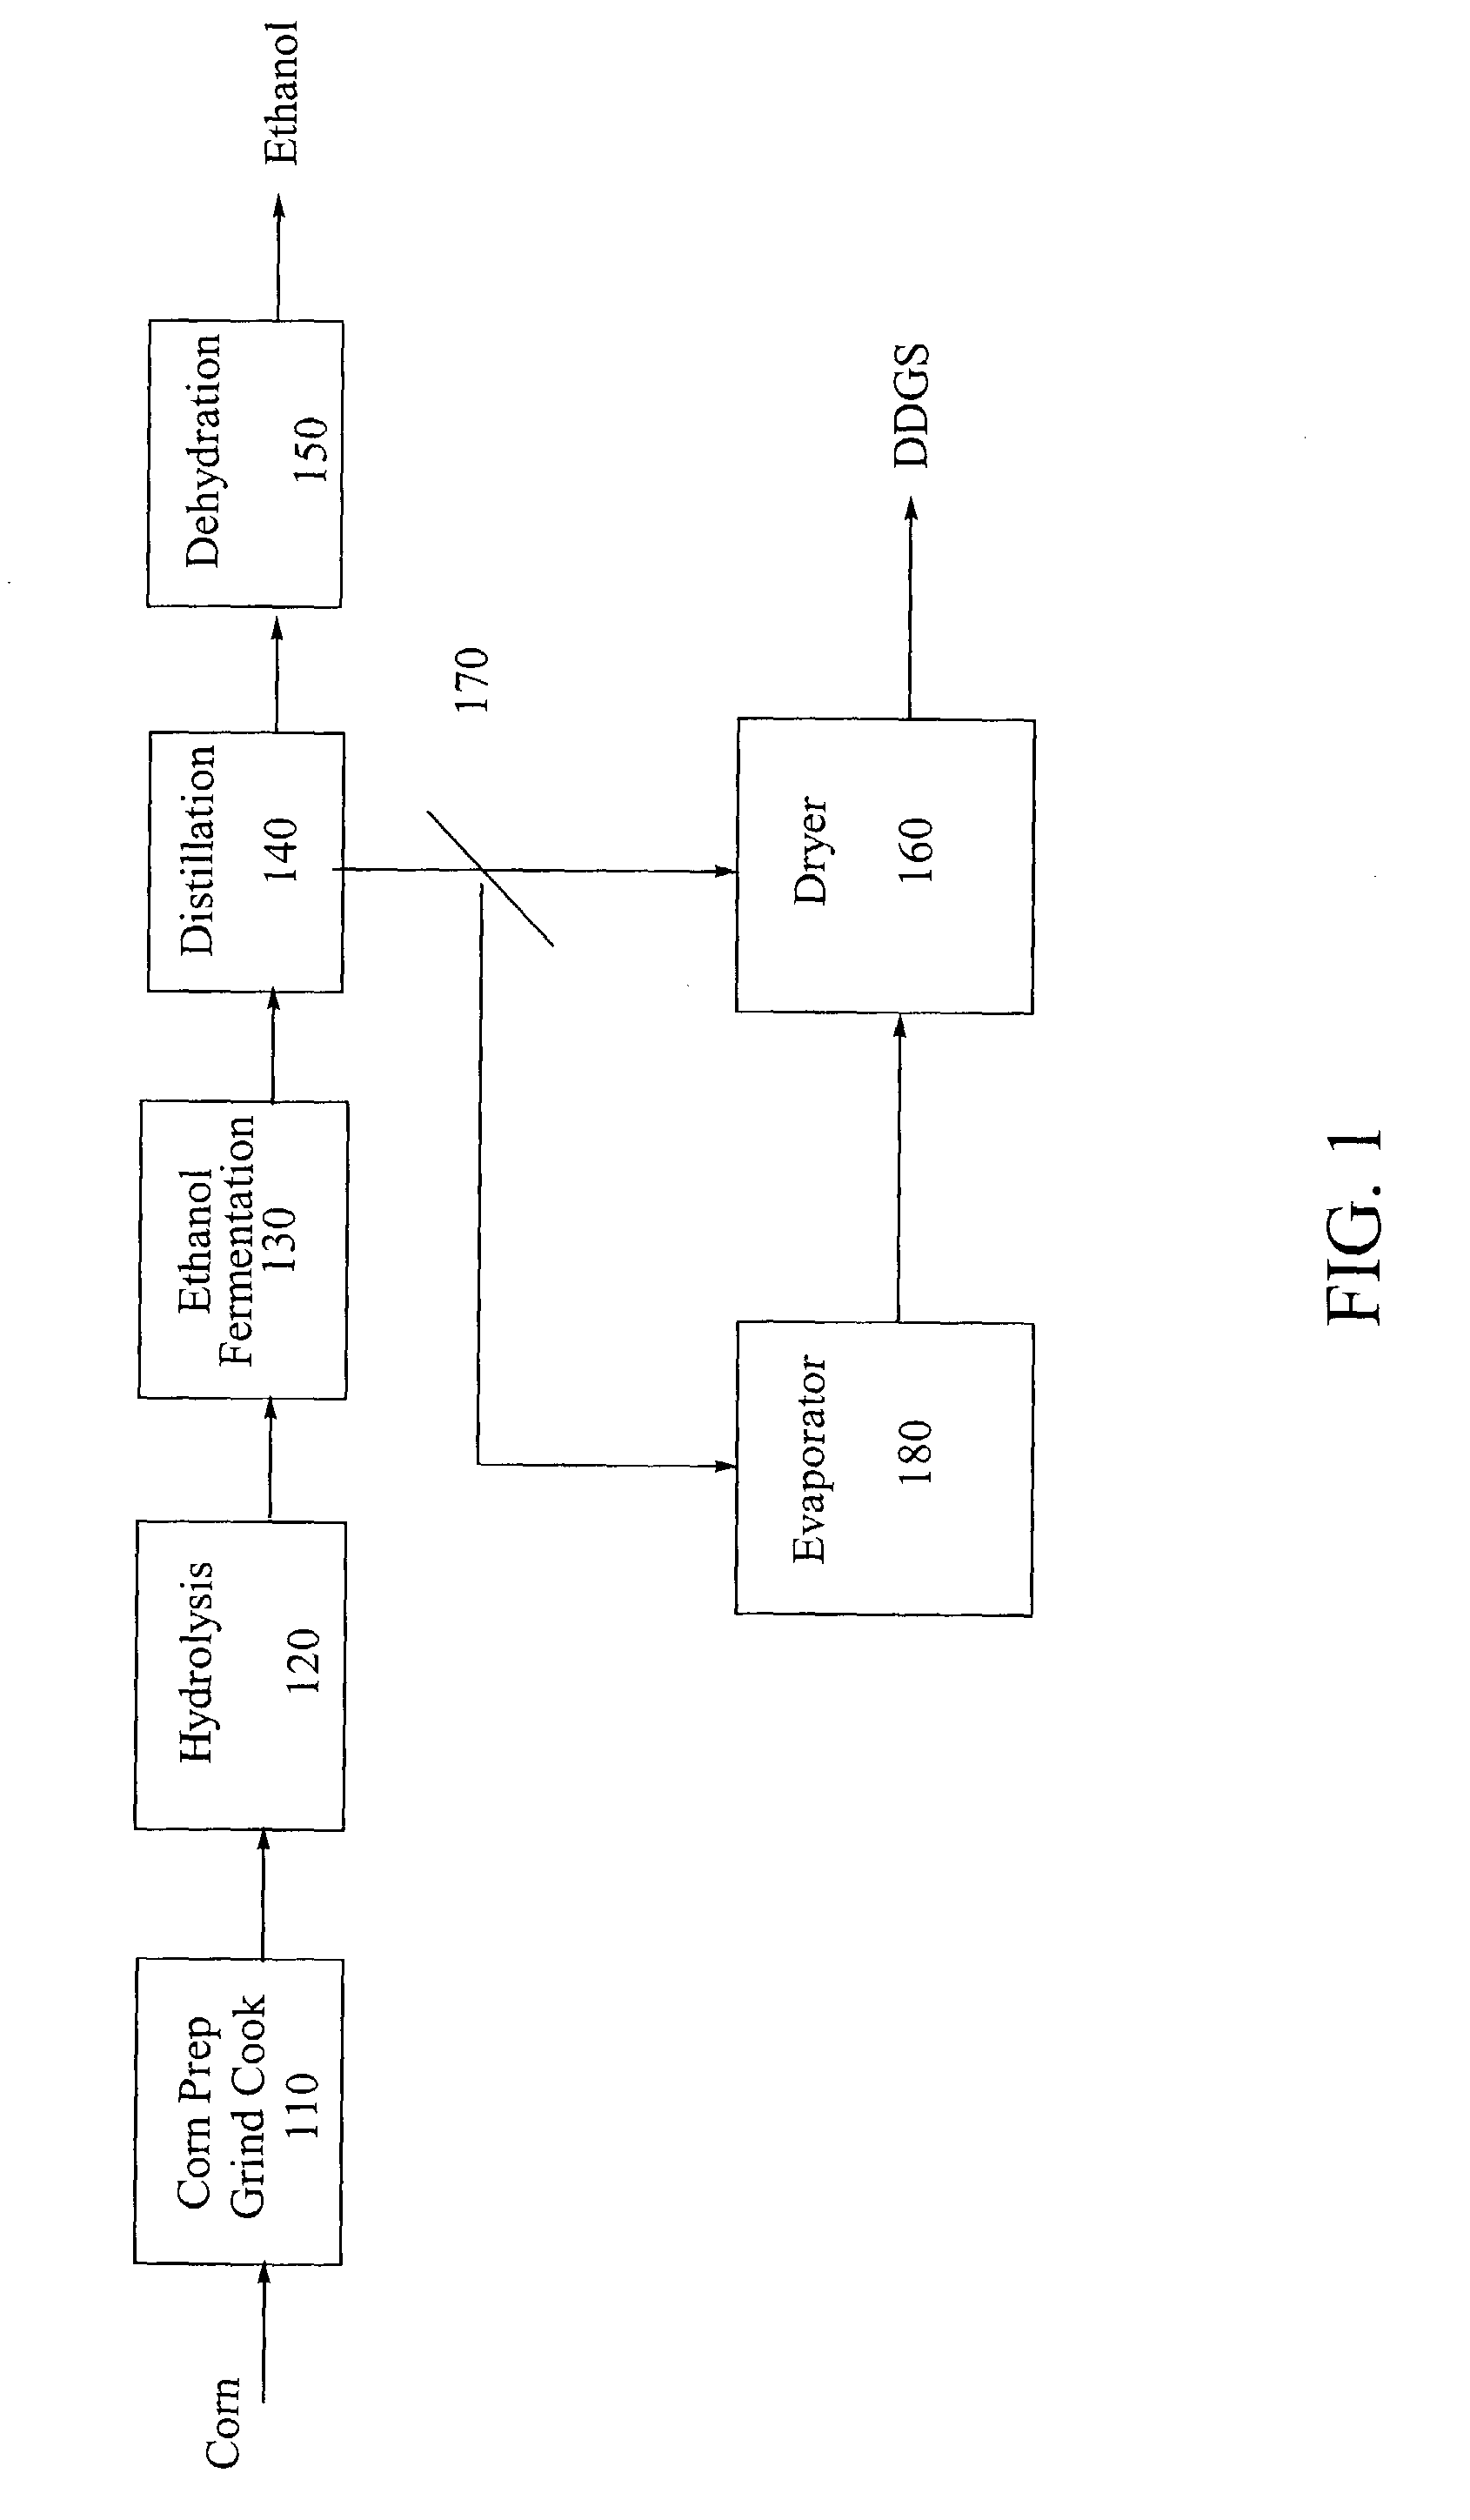 Process for producing ethanol from corn dry milling